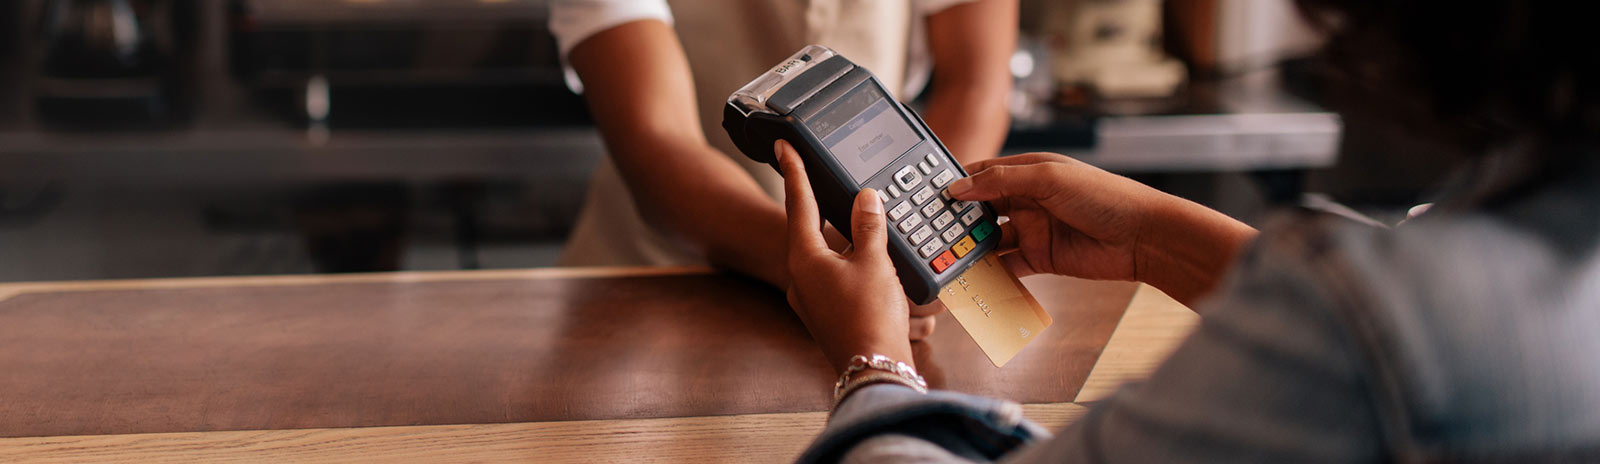 card payment machine and card